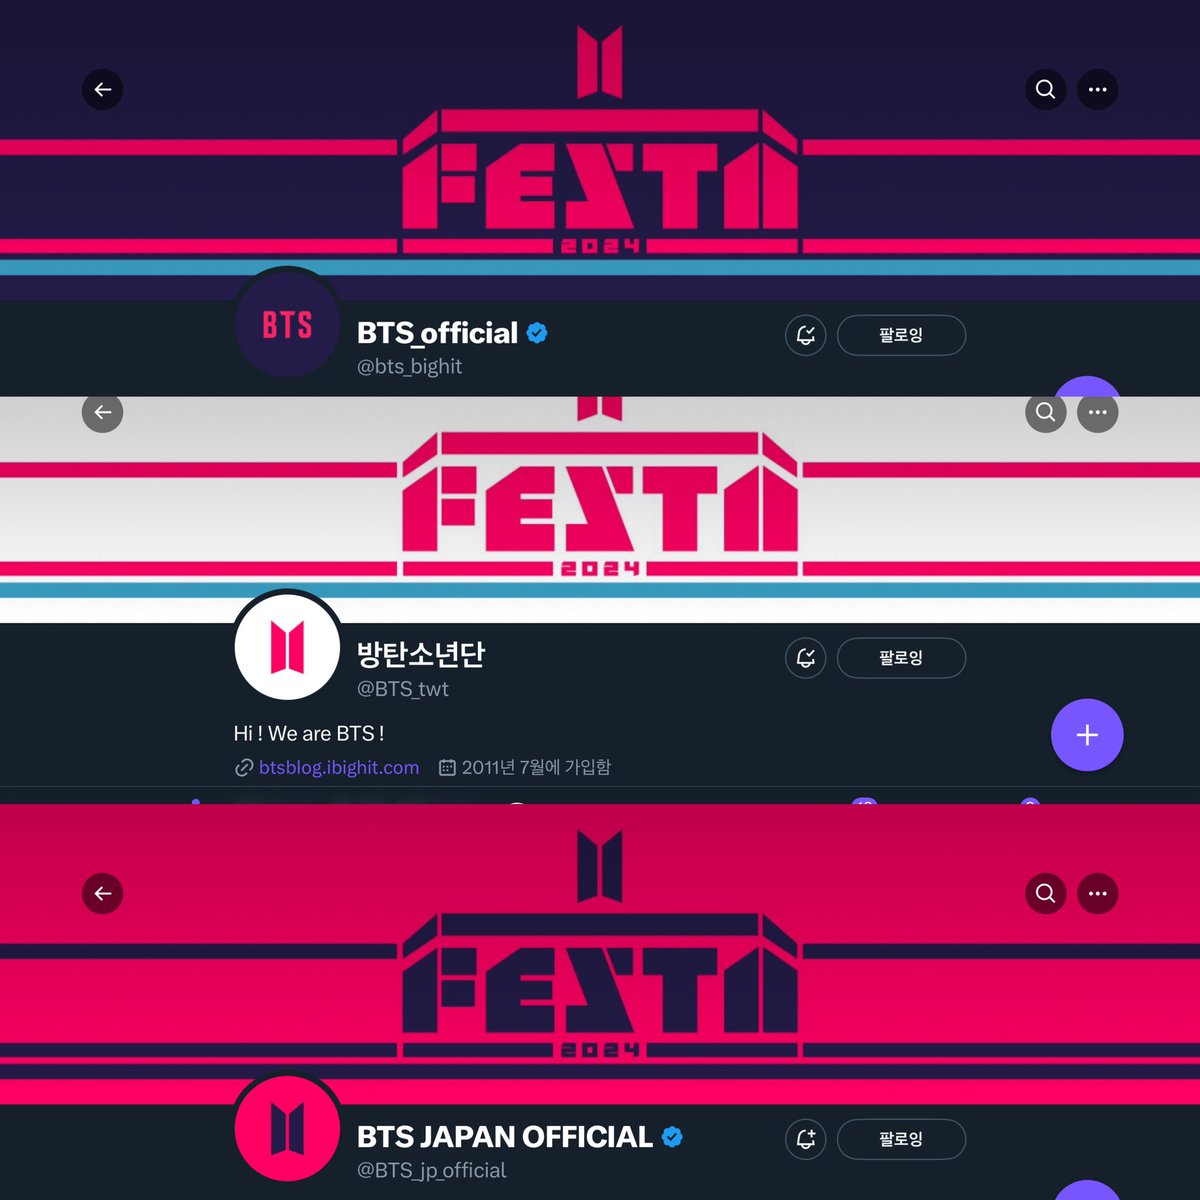 BTS OFFICIAL ACCOUNTS NEW LAYOUTs FOR FESTA!!